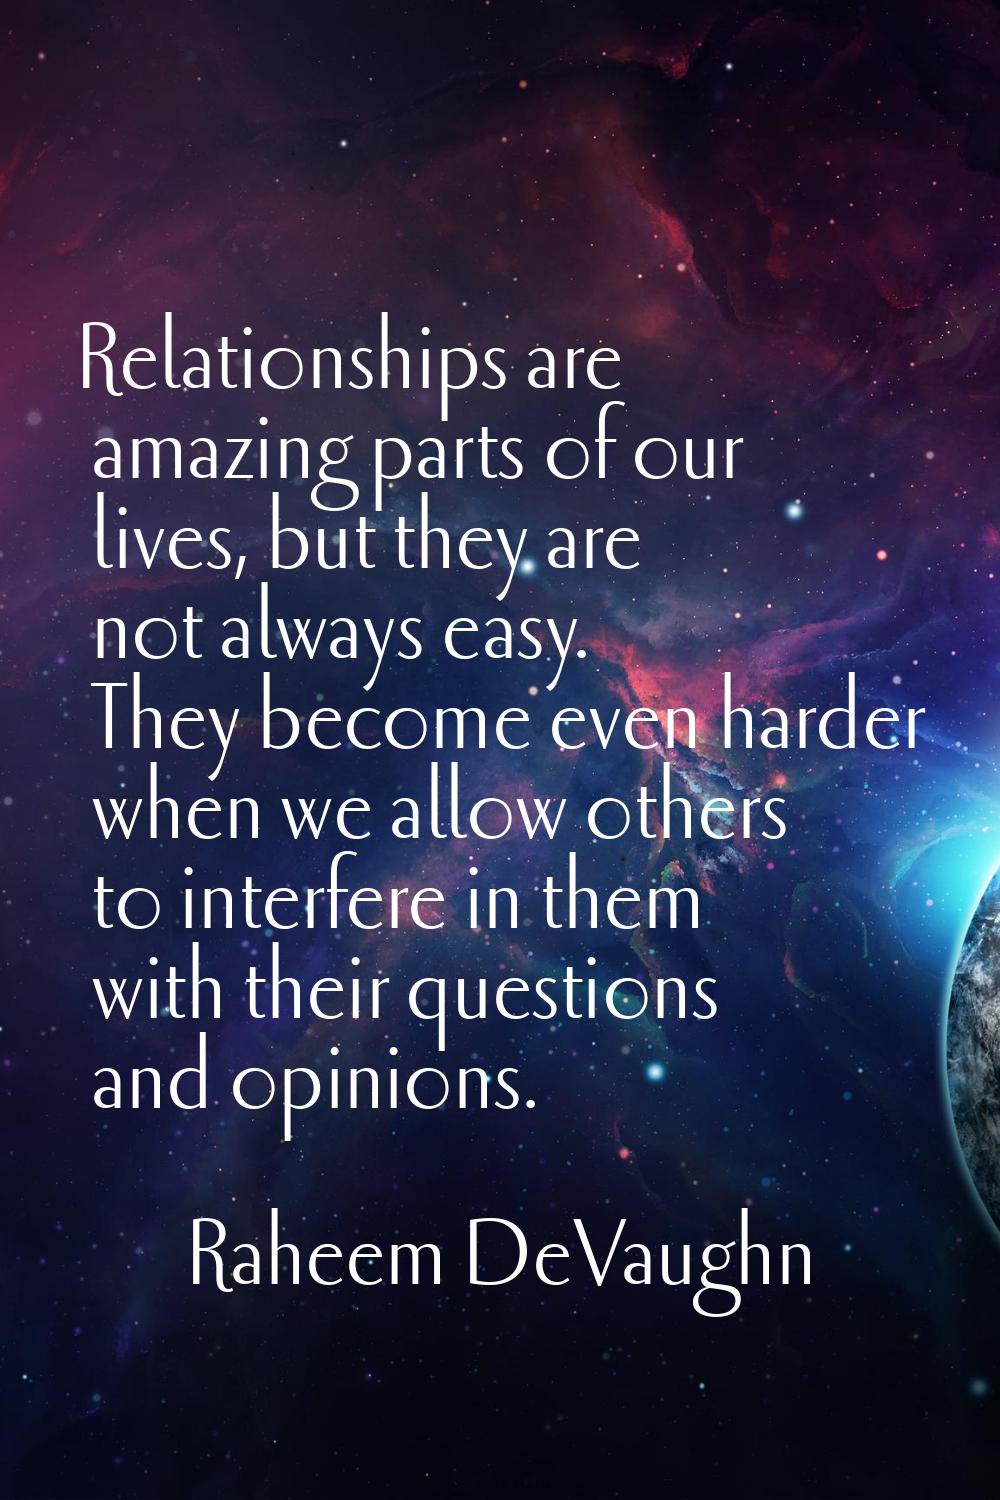 Relationships are amazing parts of our lives, but they are not always easy. They become even harder